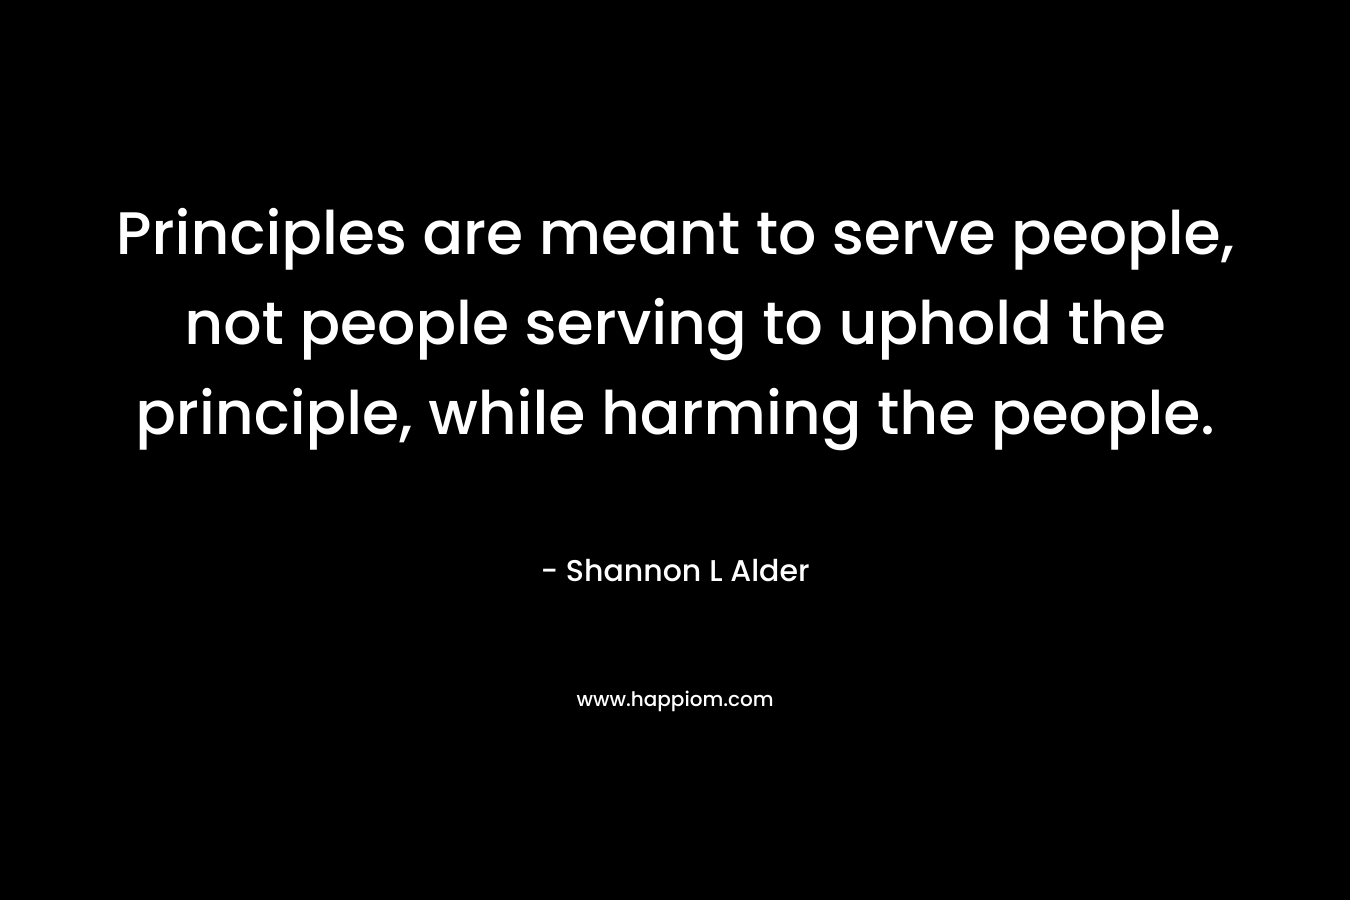 Principles are meant to serve people, not people serving to uphold the principle, while harming the people. – Shannon L Alder